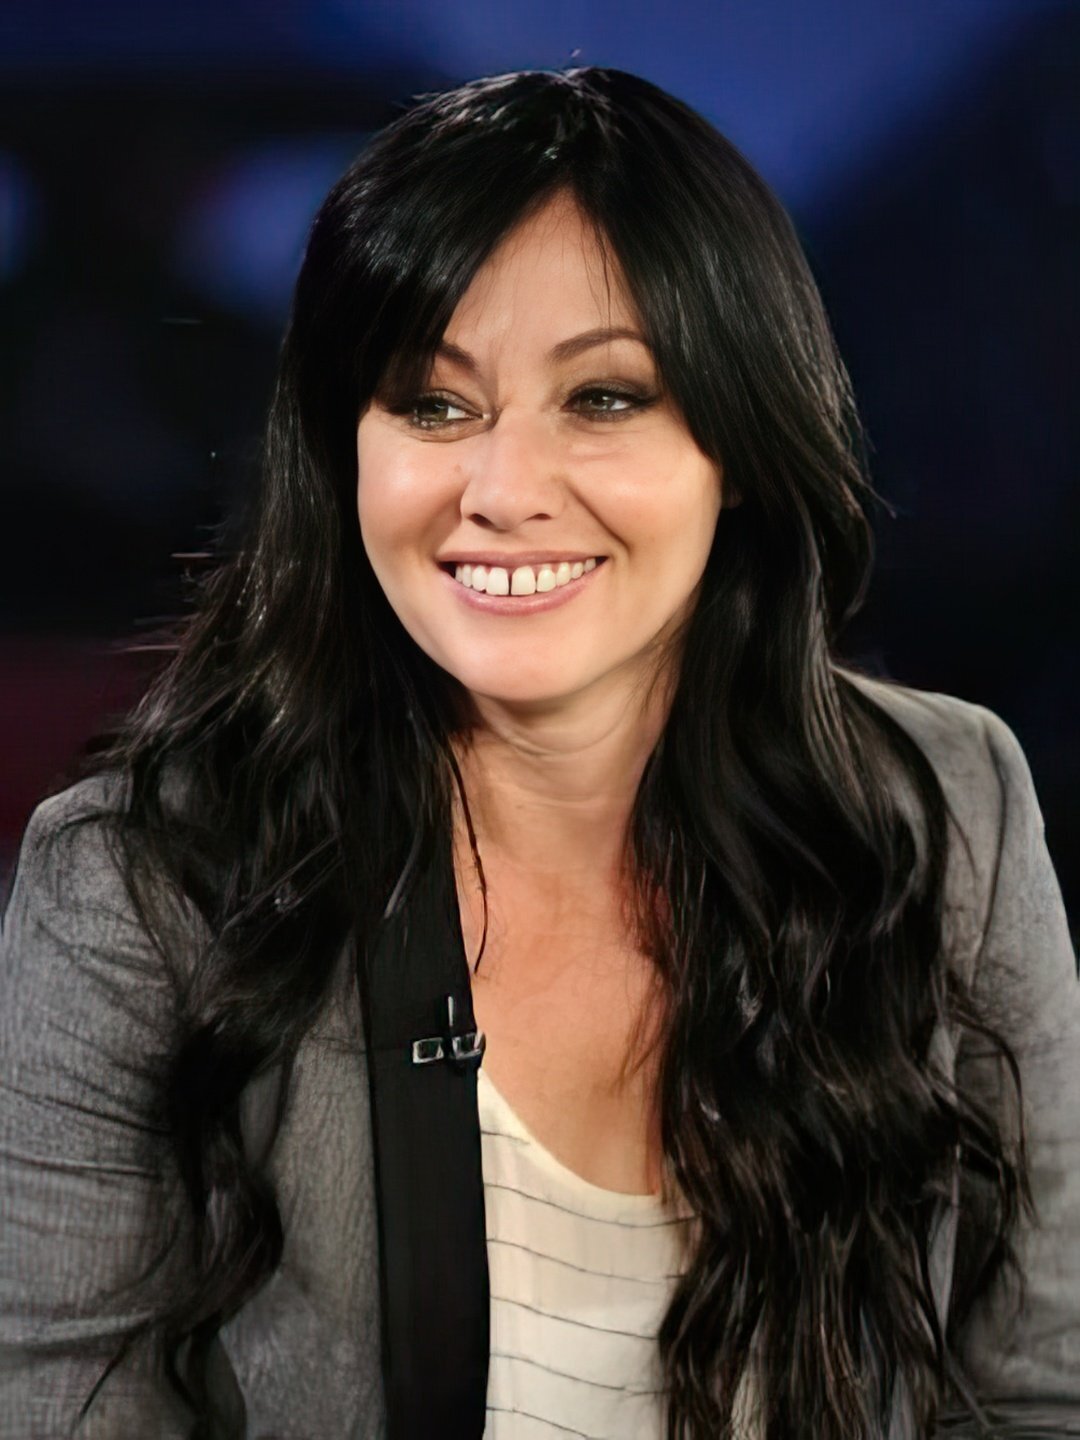 Shannen Doherty early childhood